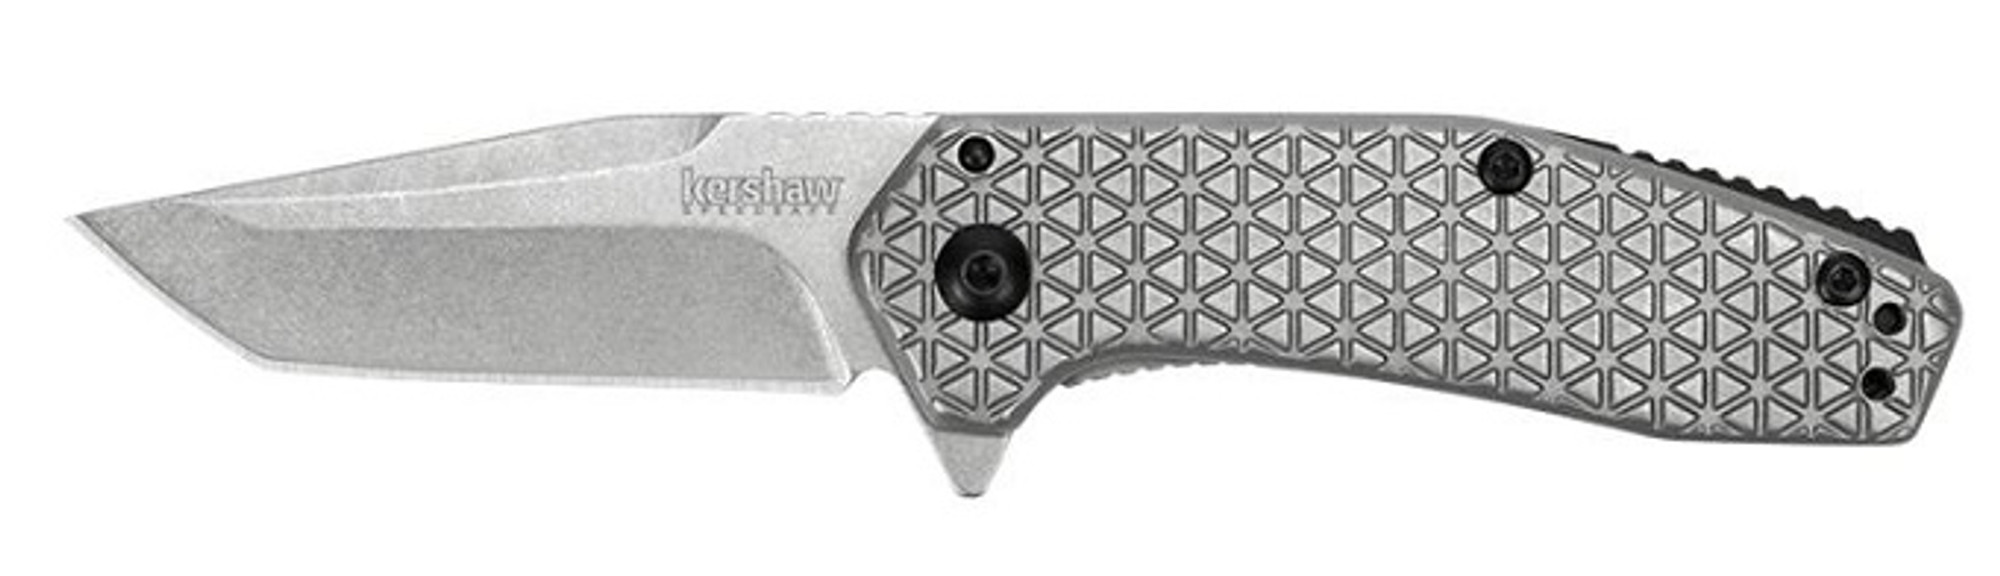 Kershaw 1324 Cathode Assisted Opening With Frame Lock